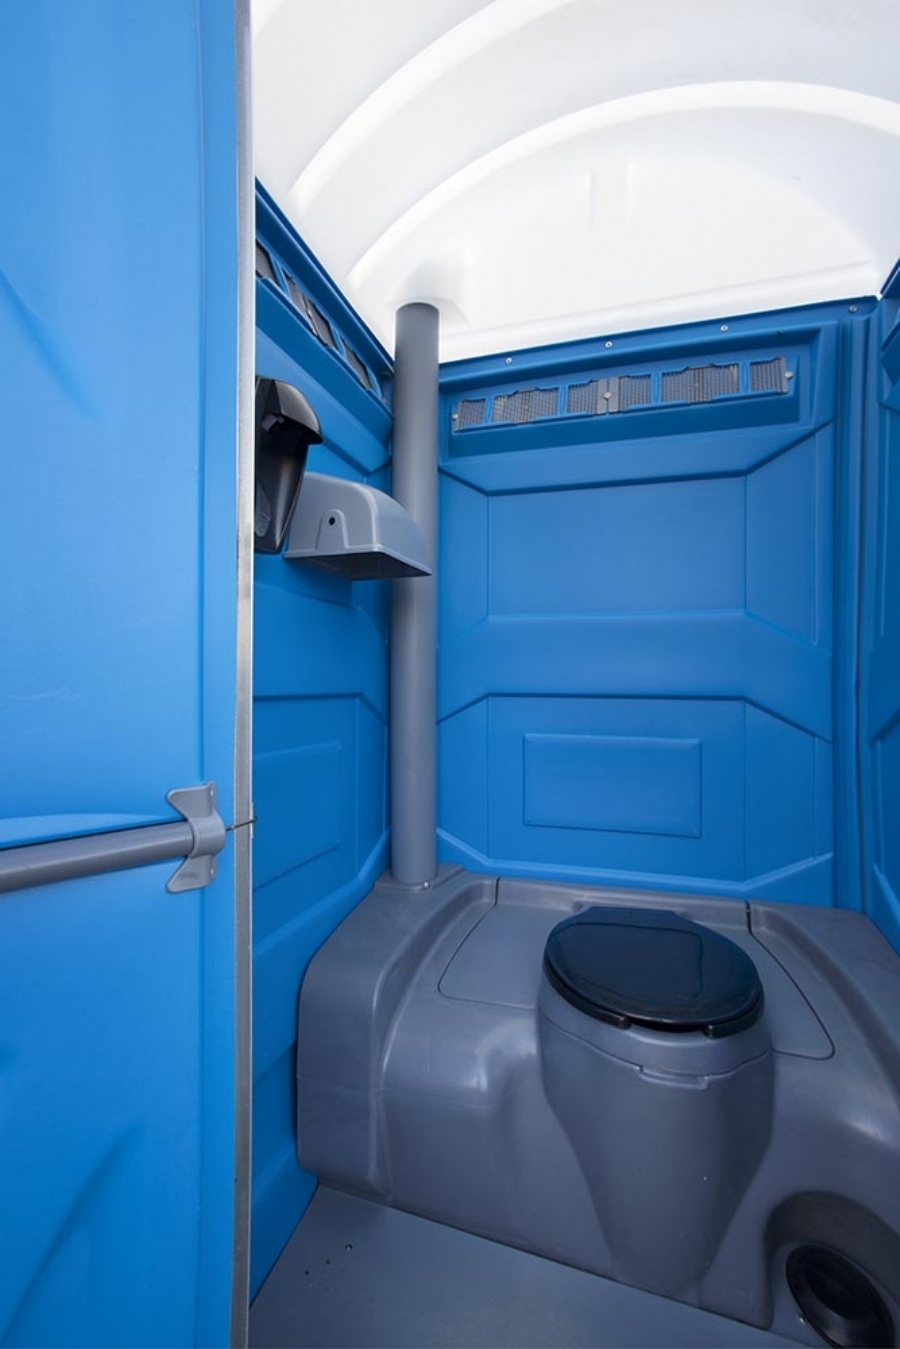 Portable event toilets for hire in Cornwall.